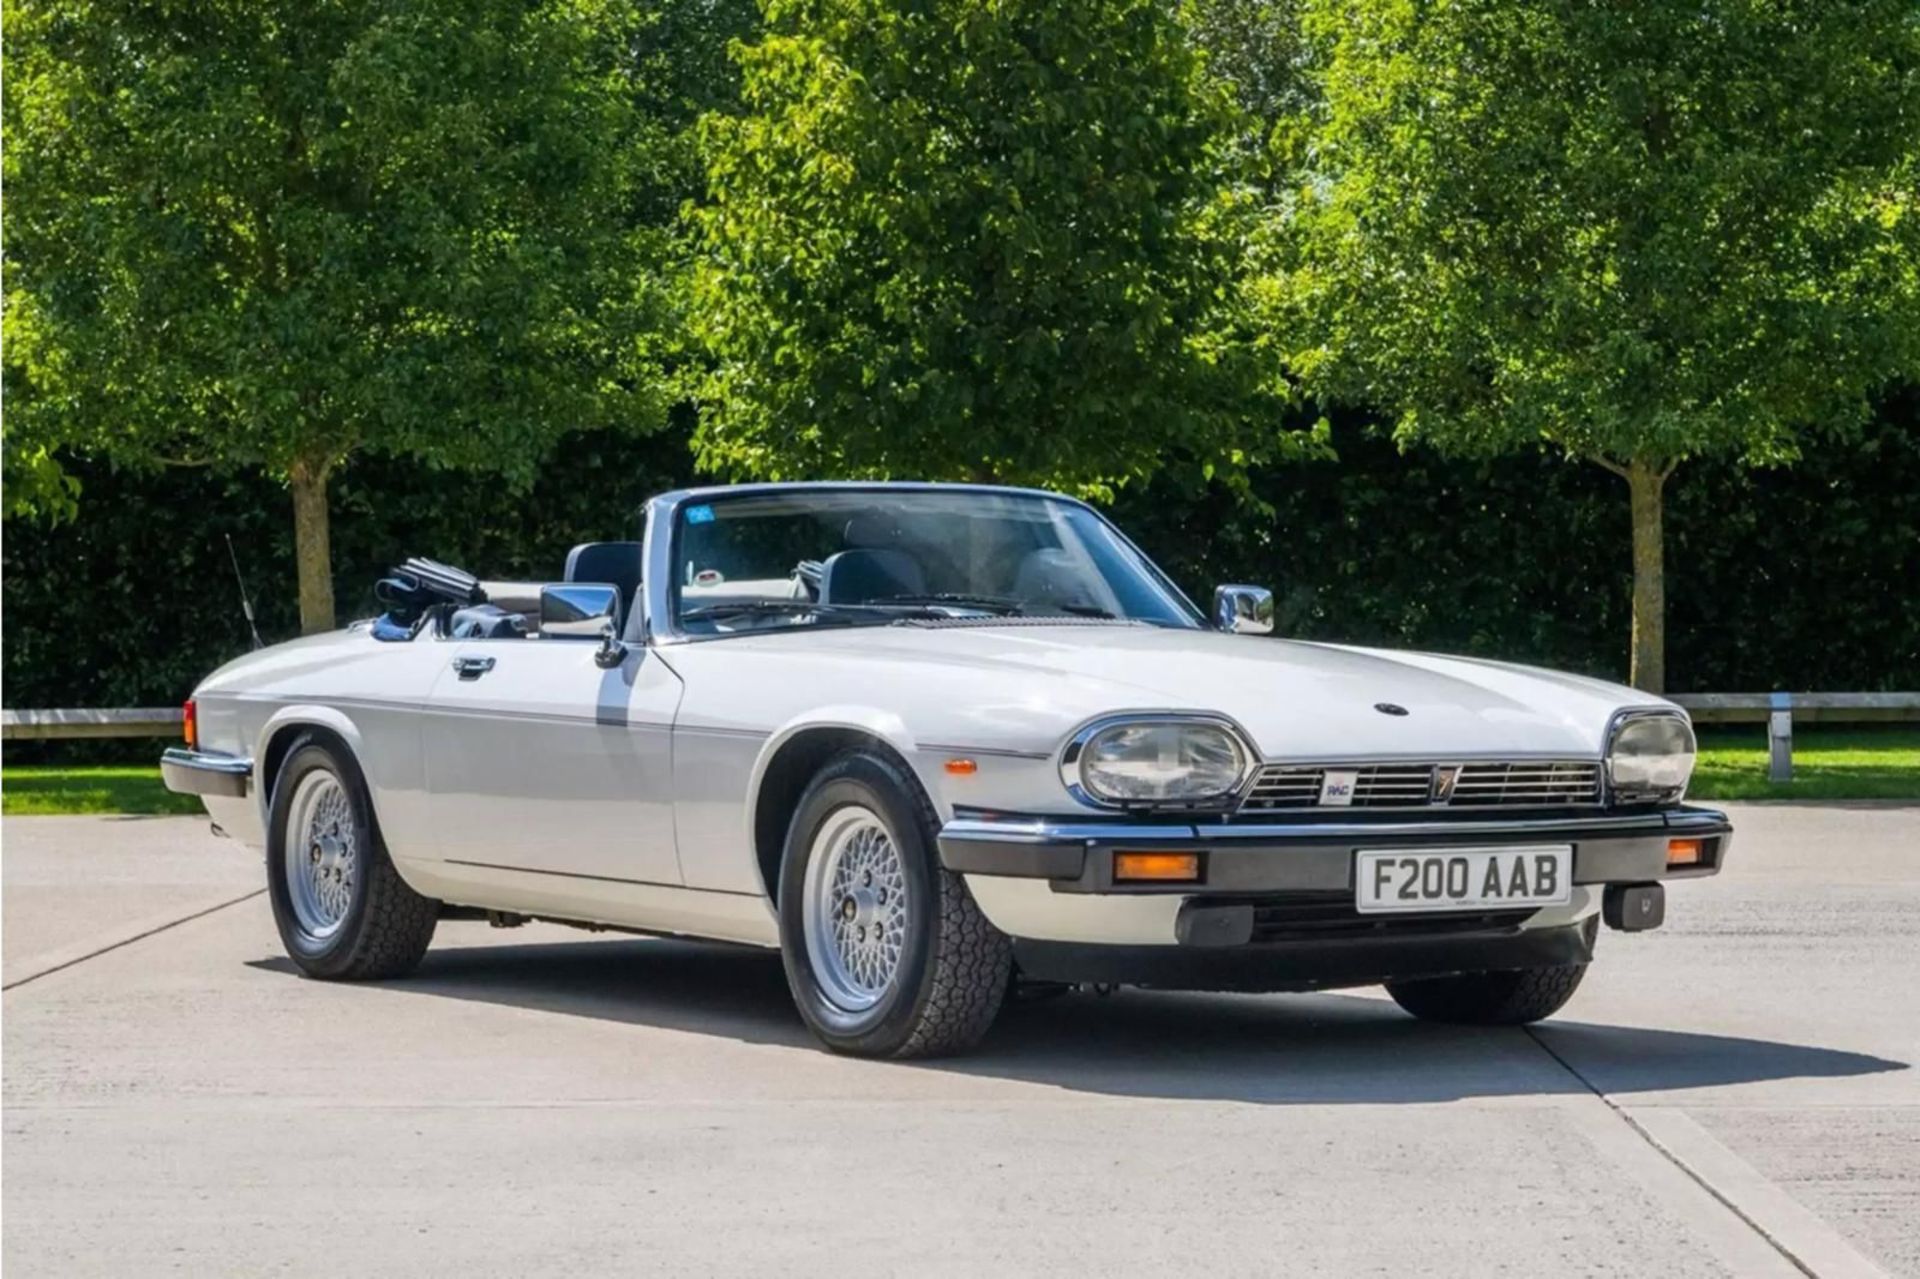 Jaguar XJ-S Convertible 1989. Just 19800 miles from new!